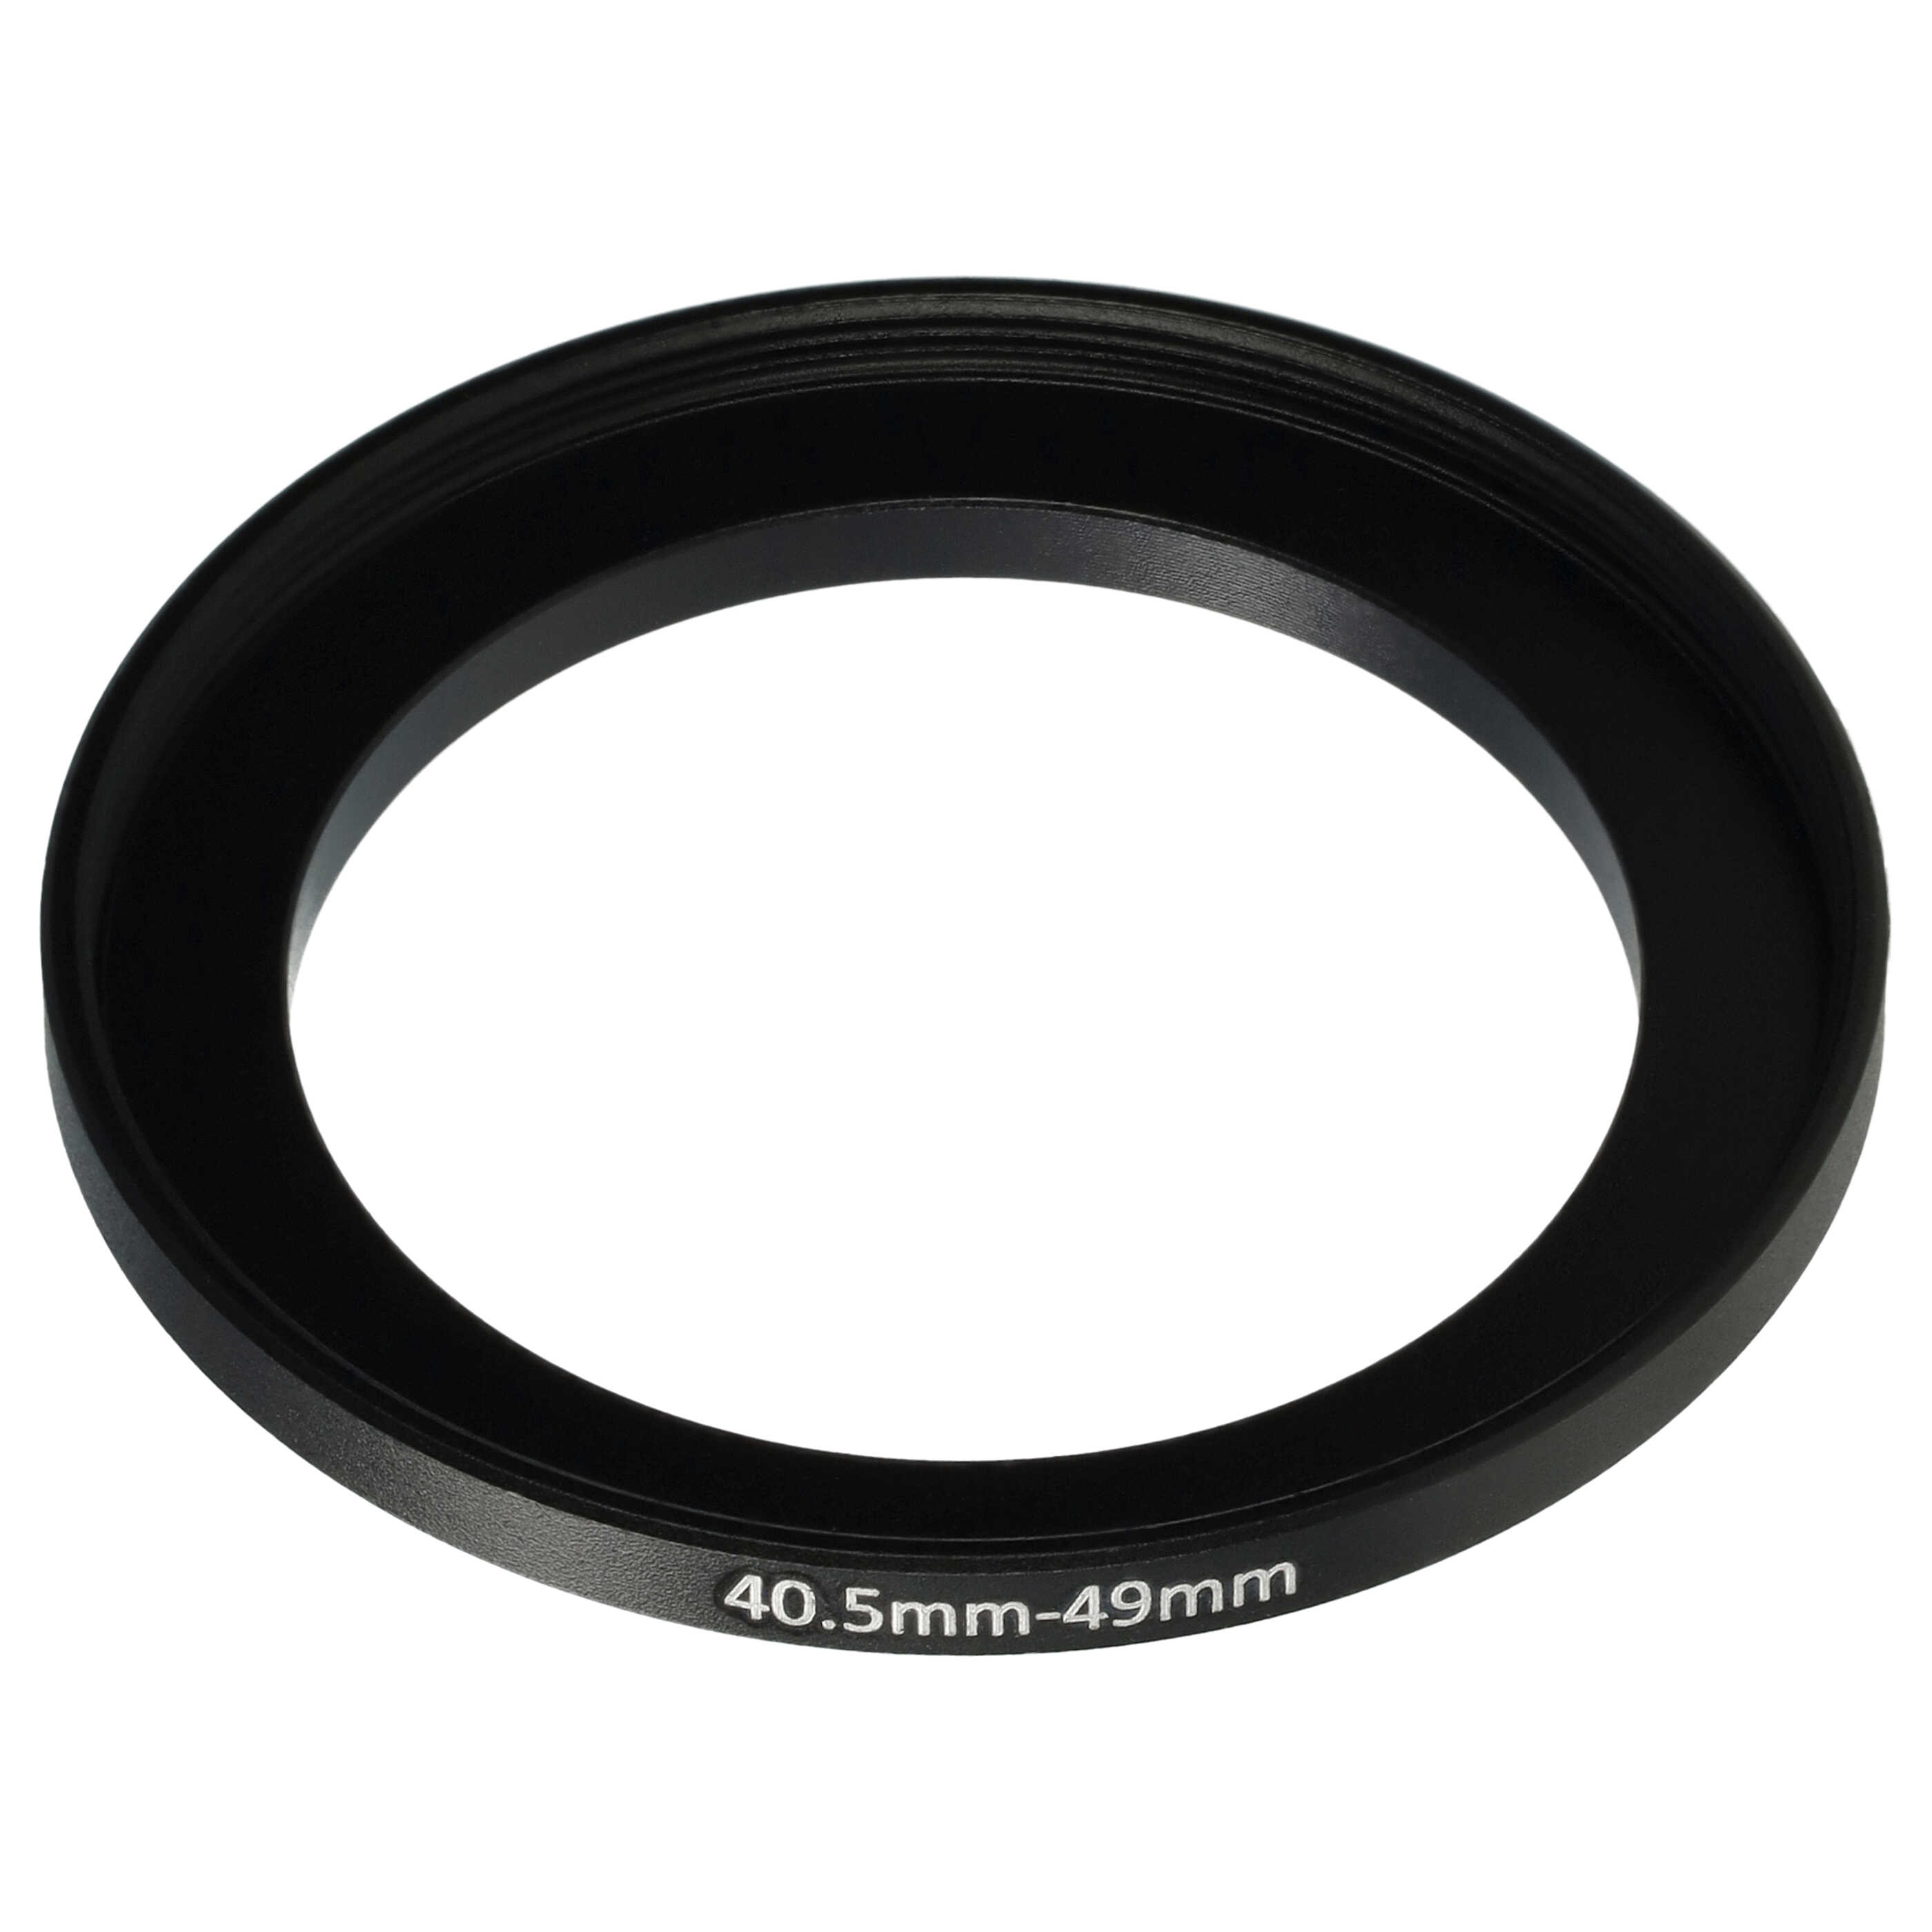 Step-Up Ring Adapter of 40.5 mm to 49 mmfor various Camera Lens - Filter Adapter